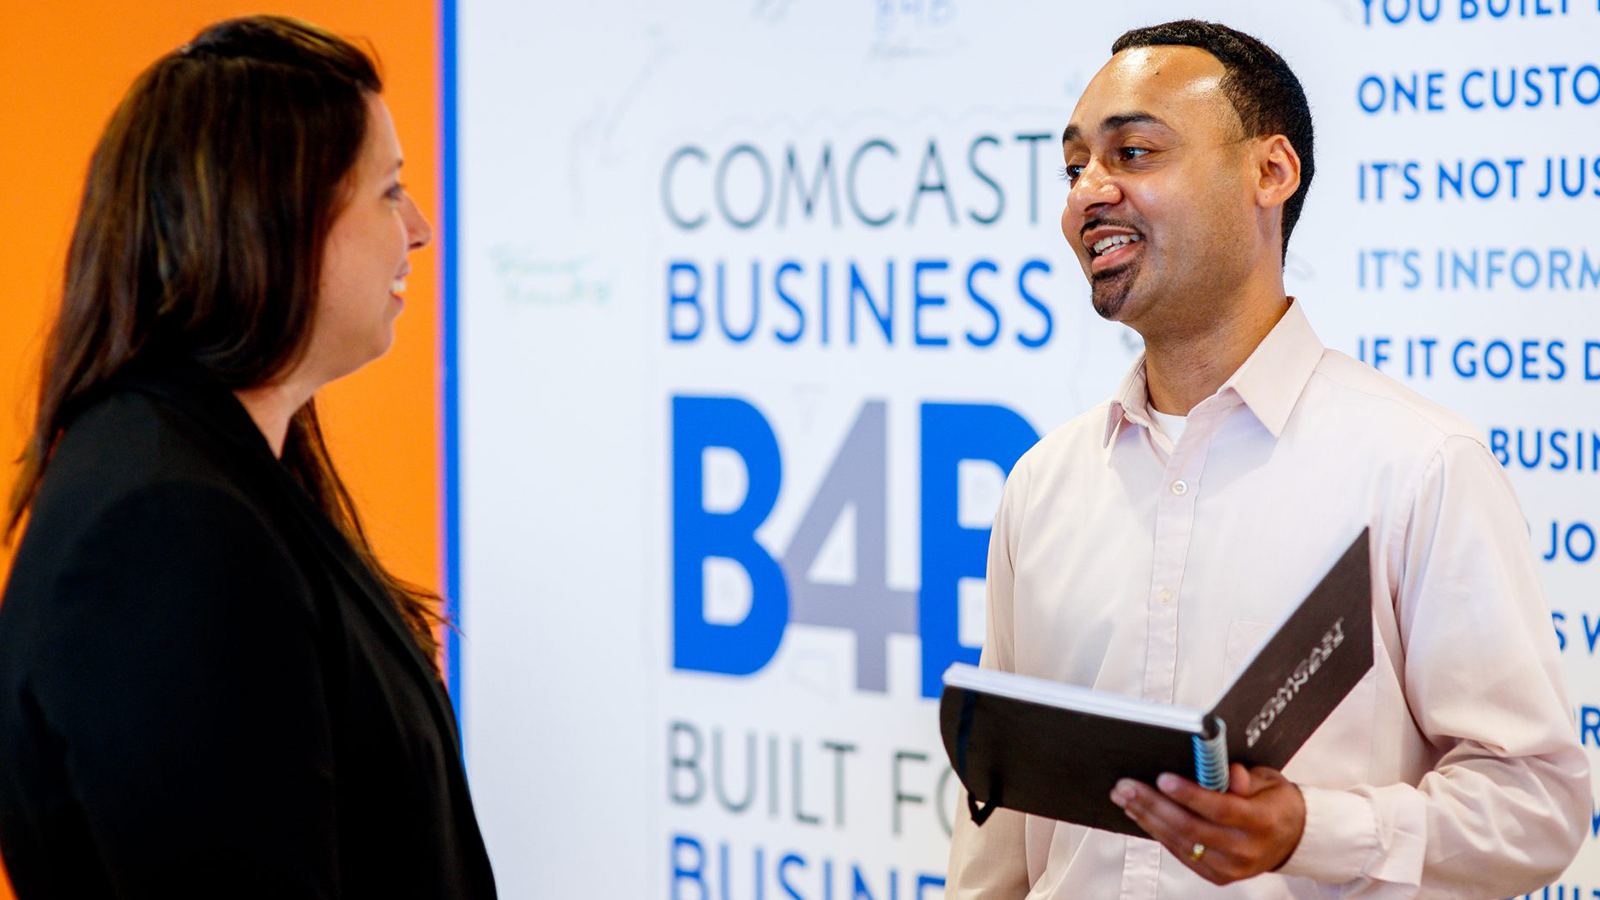 Comcast Business employee talking to business owner.